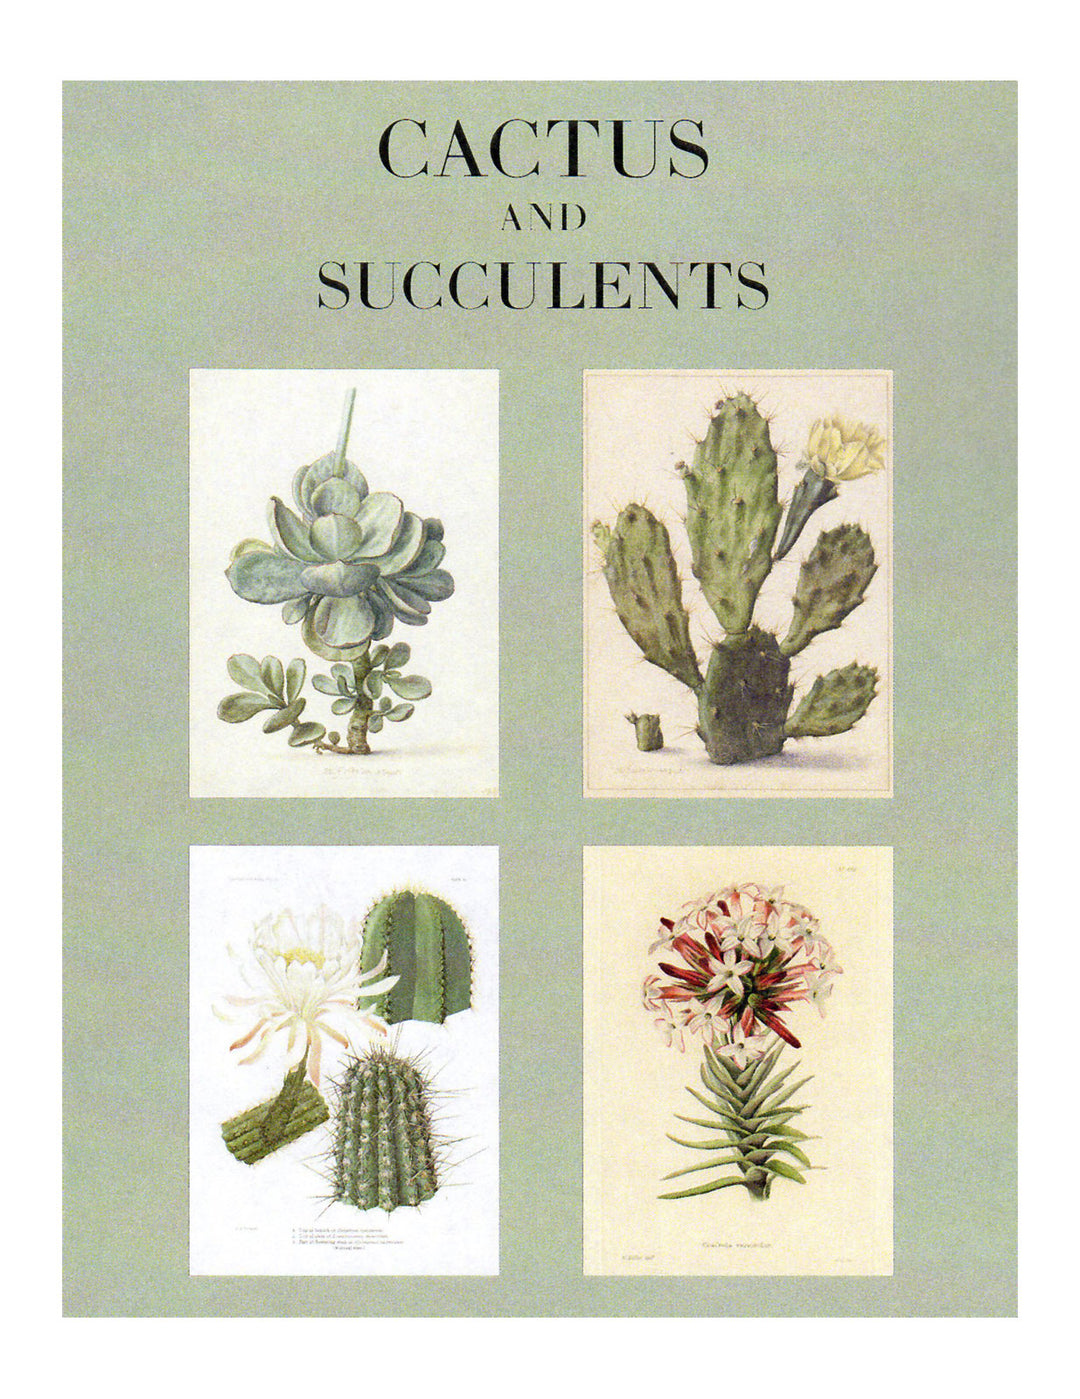 Cactus Note Cards and Succulents Note Cards - Boxed Set of 16